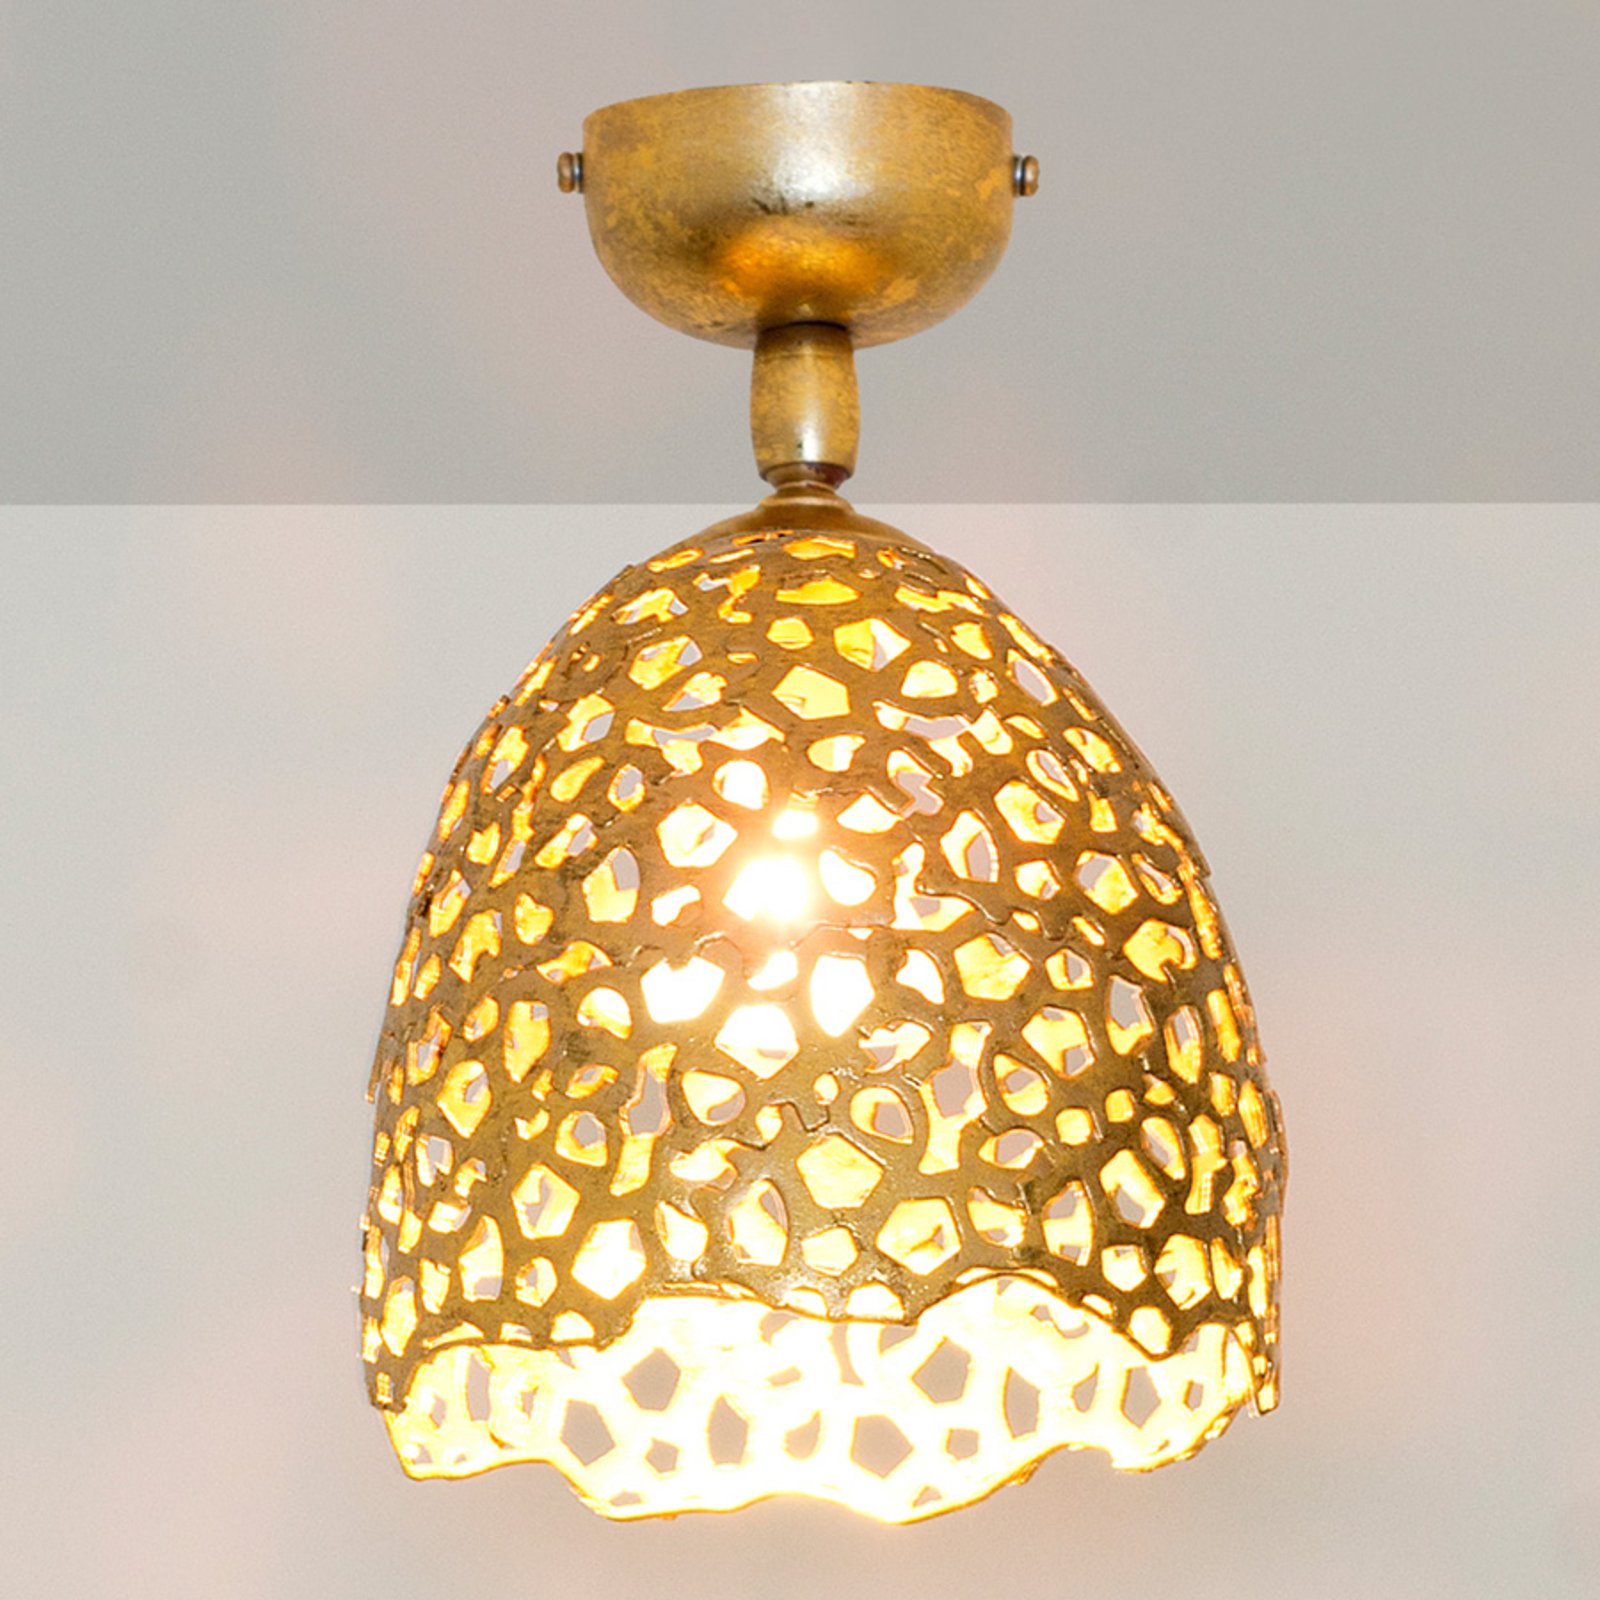 Girevole - a perforated ceiling light